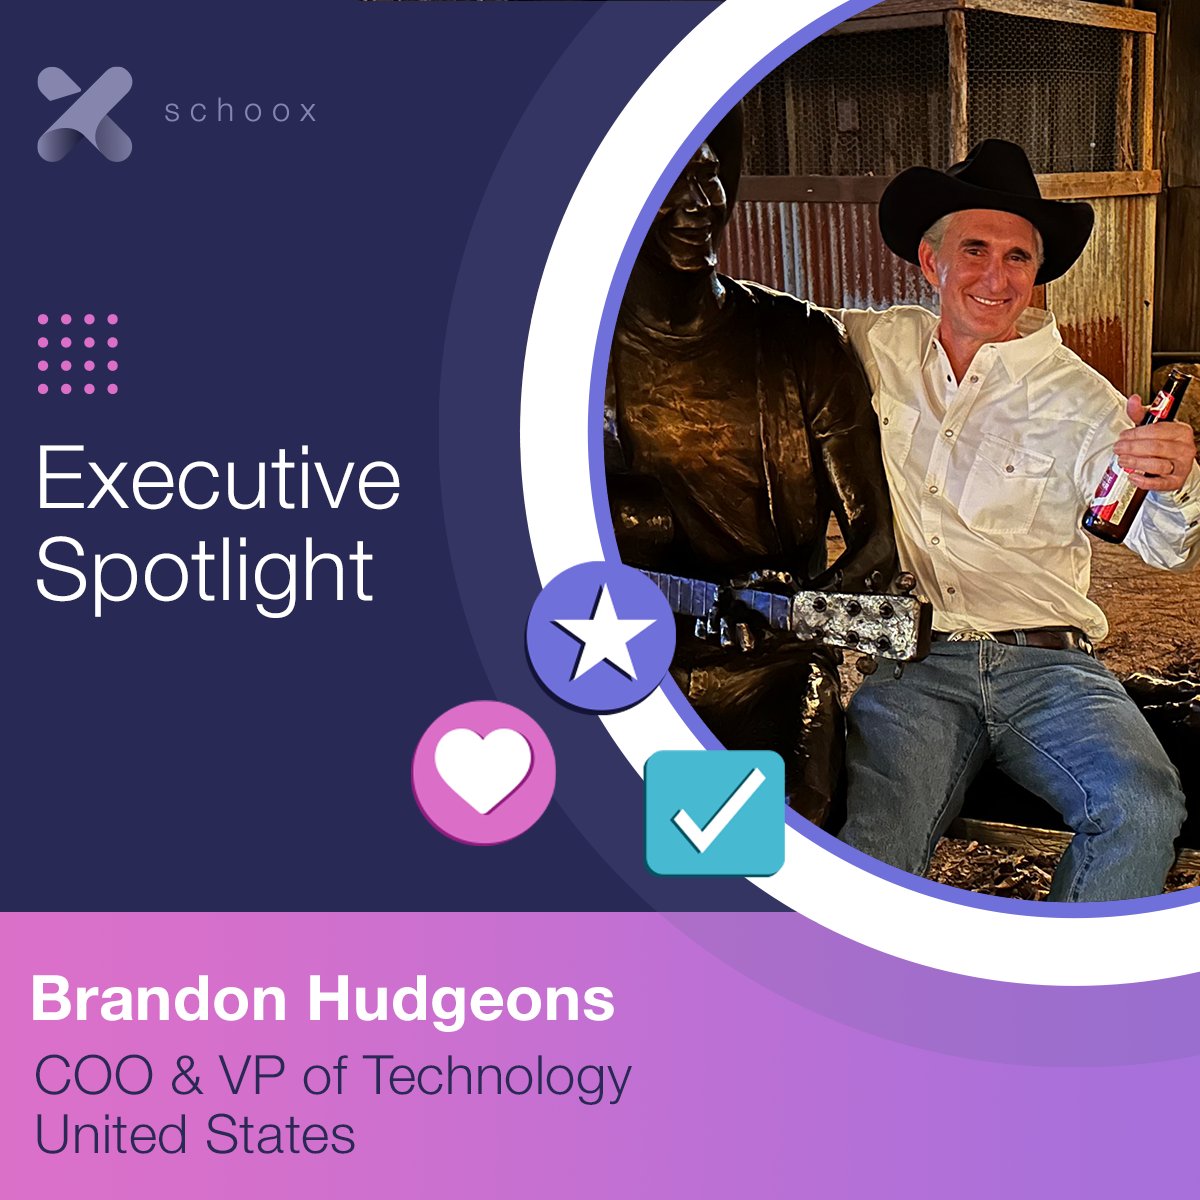 Our Executive Spotlight for February goes out Brandon Hudgeons! Brandon says that 'hiring excellent people is difficult, but it is much harder to manage mediocre people. Find great people, trust them, and hold on to them.'